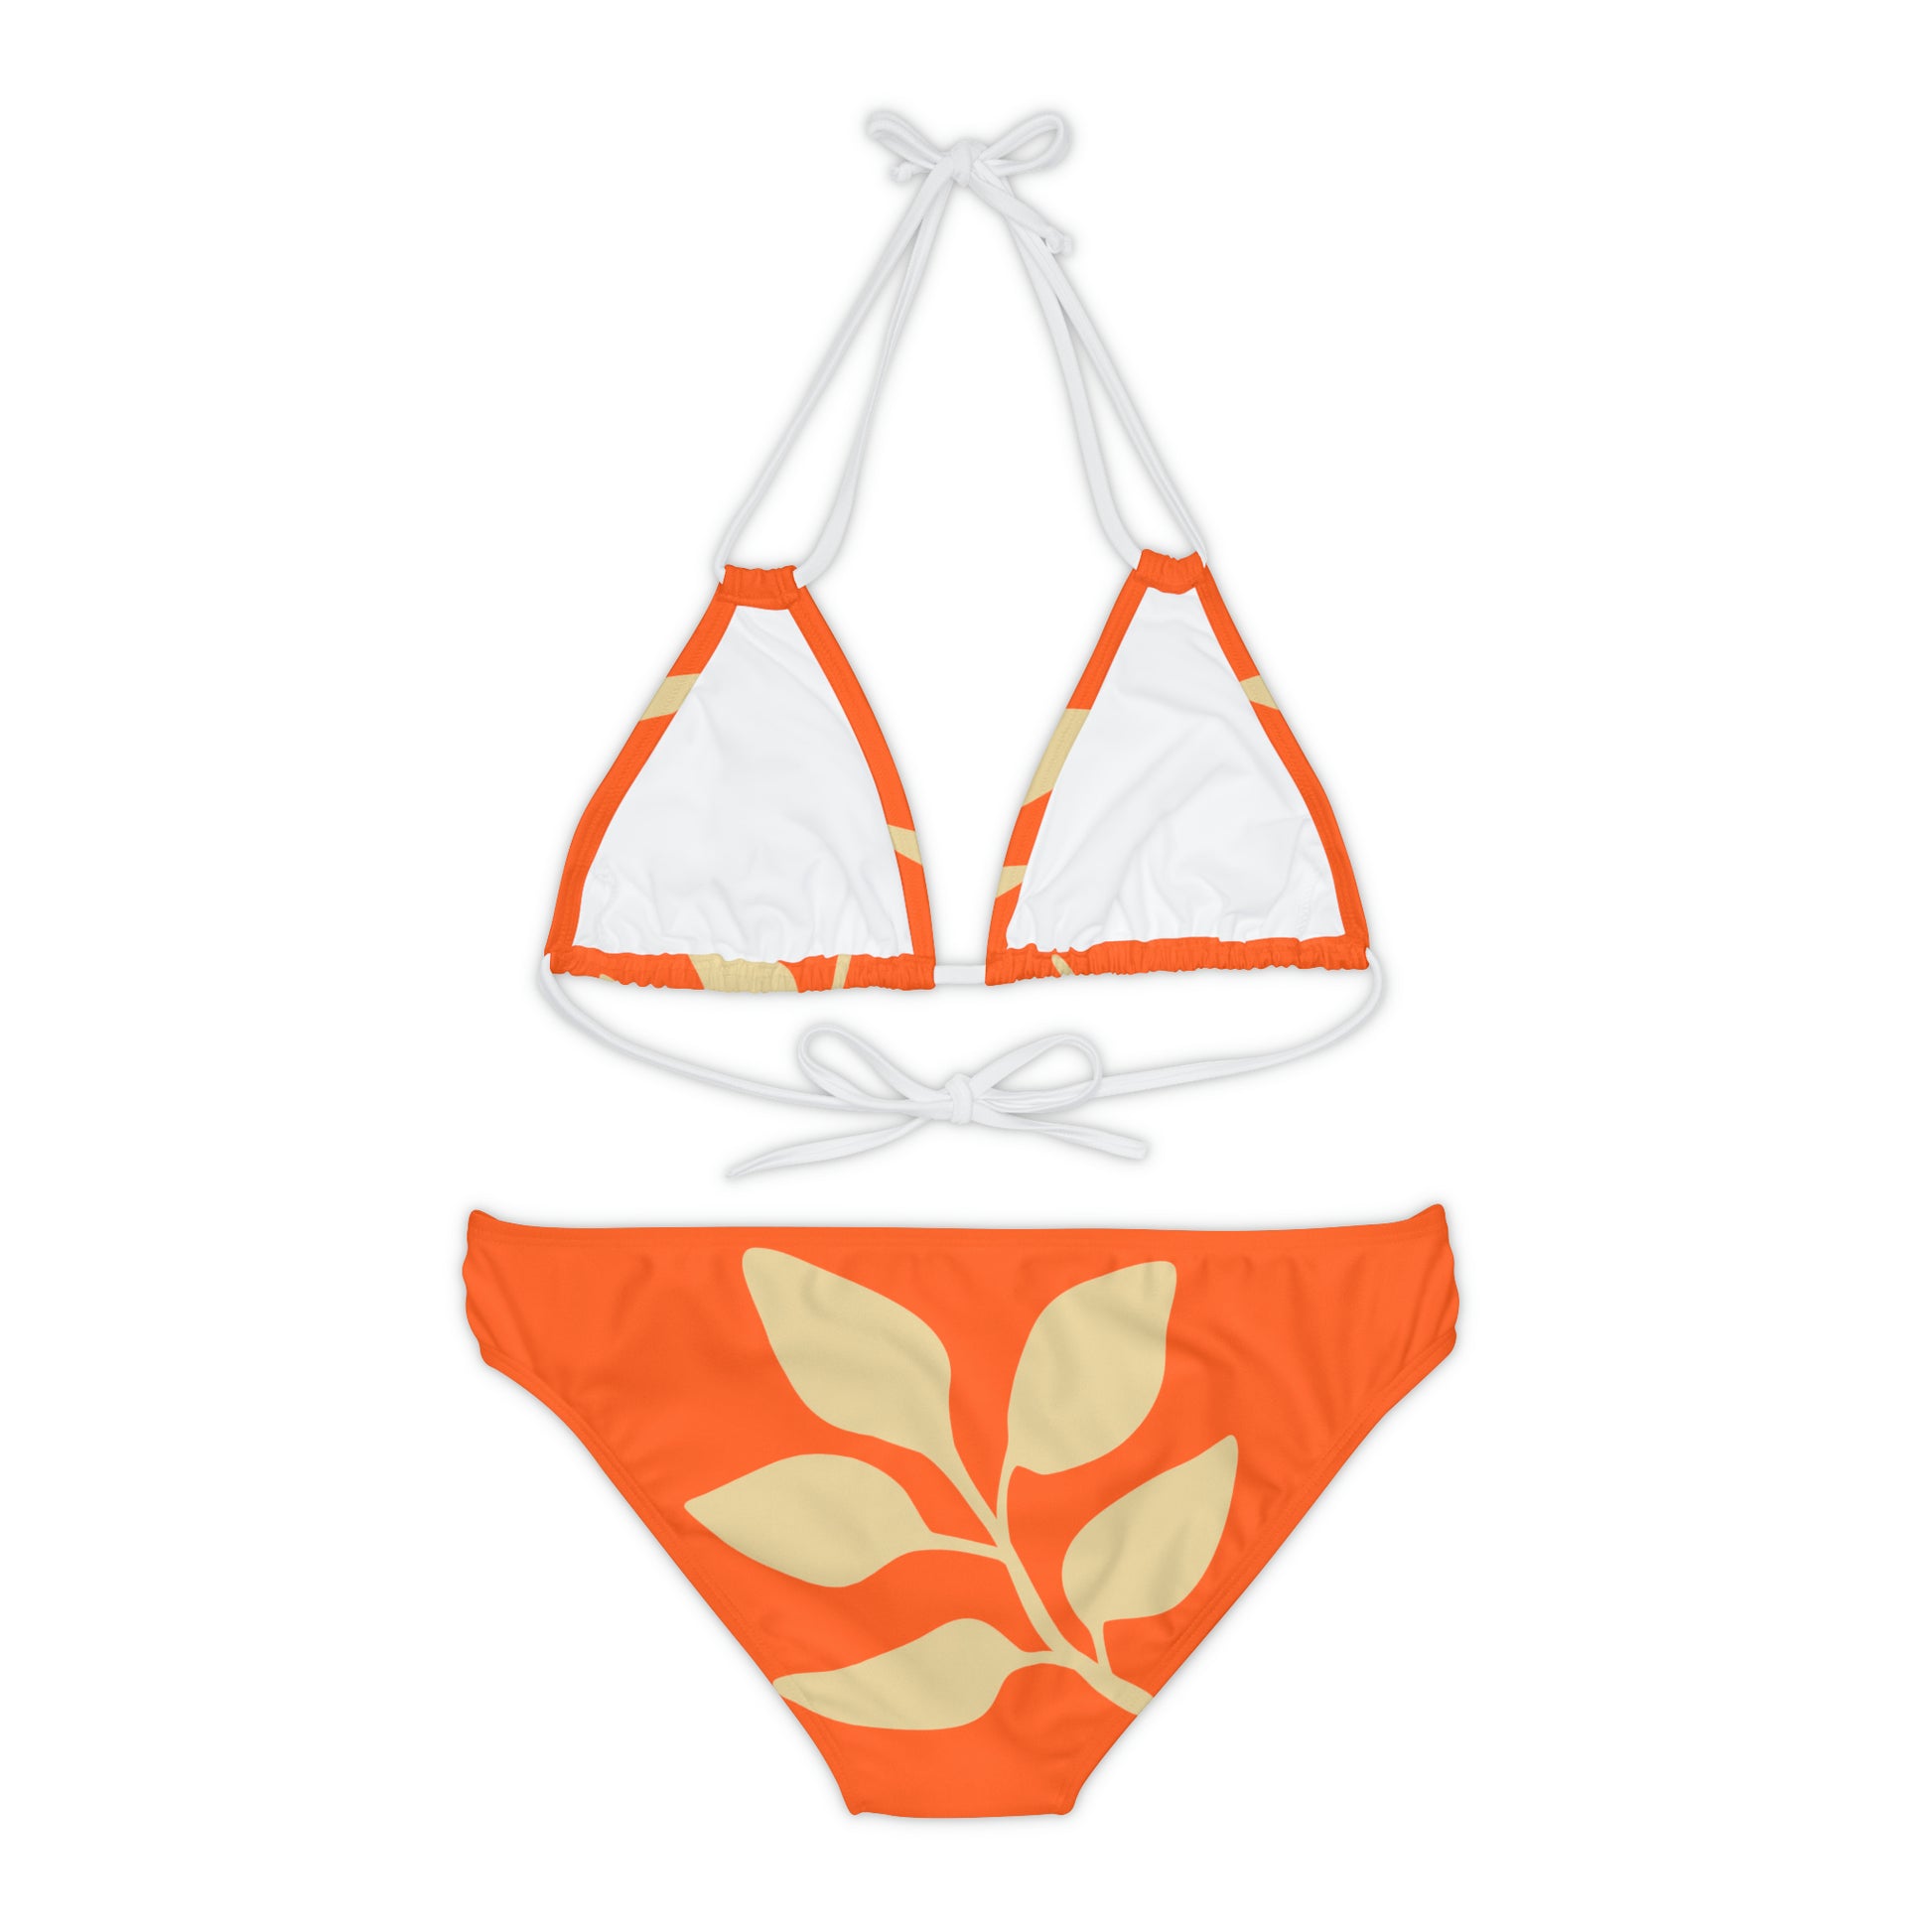 Orange Vintages Strappy Bikini Set Made with 4-way stretch Tricot (82% Microfiber, 18% Spandex), this strappy bikini set is the perfect companion to all summer escapades. With adjustable elastic straps for a perfect fit, this complete two-piece swimsuit to become an instant summer hit.   Shipping From USA To United States